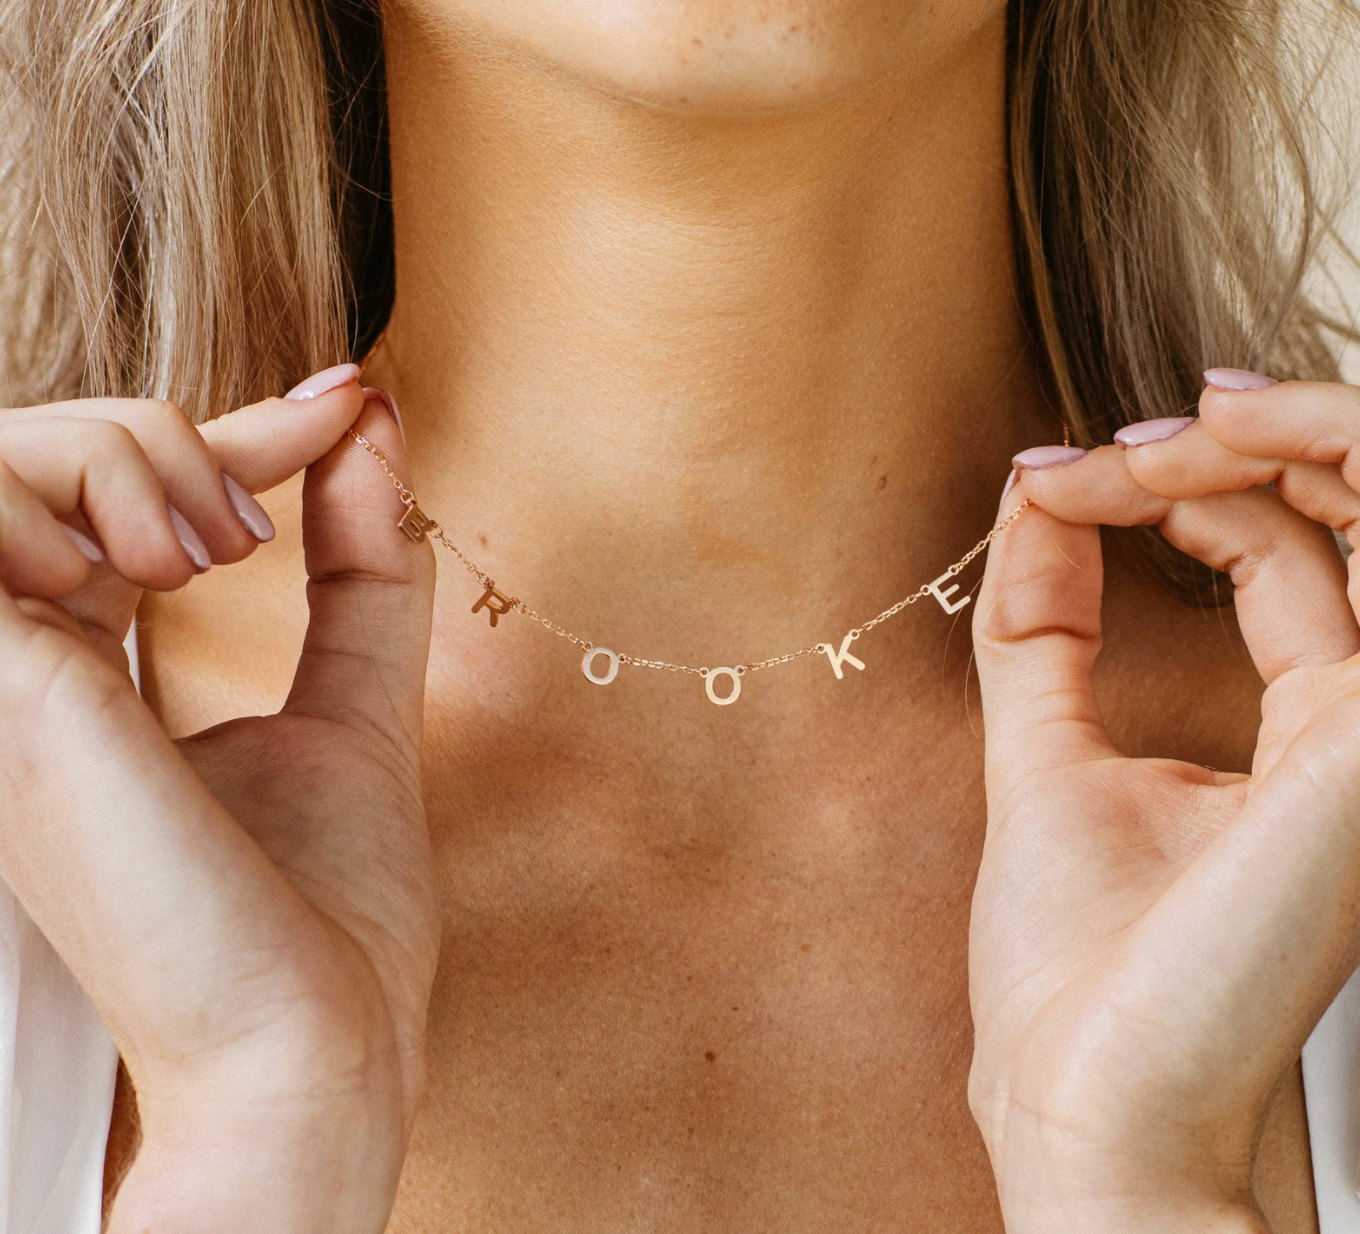 model wearing name necklace that reads brooke